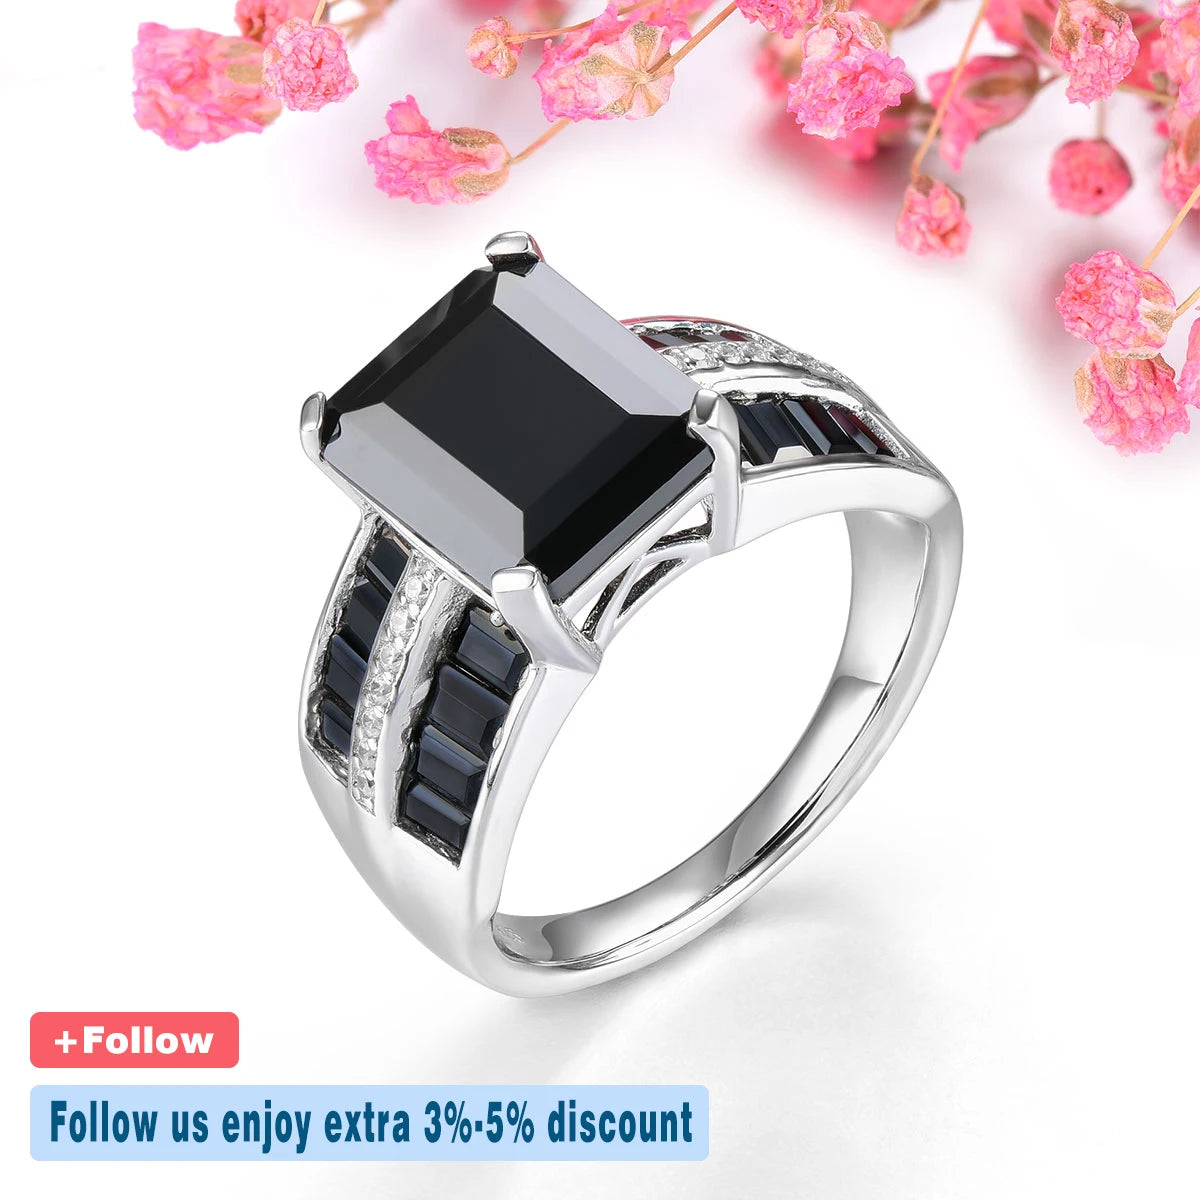 Natural Black Spinel Sterling Silver Unisex Men's Ring 6.2 Carats Faced Cut Spinel Classic Business Gifts Style Fine Jewelrys